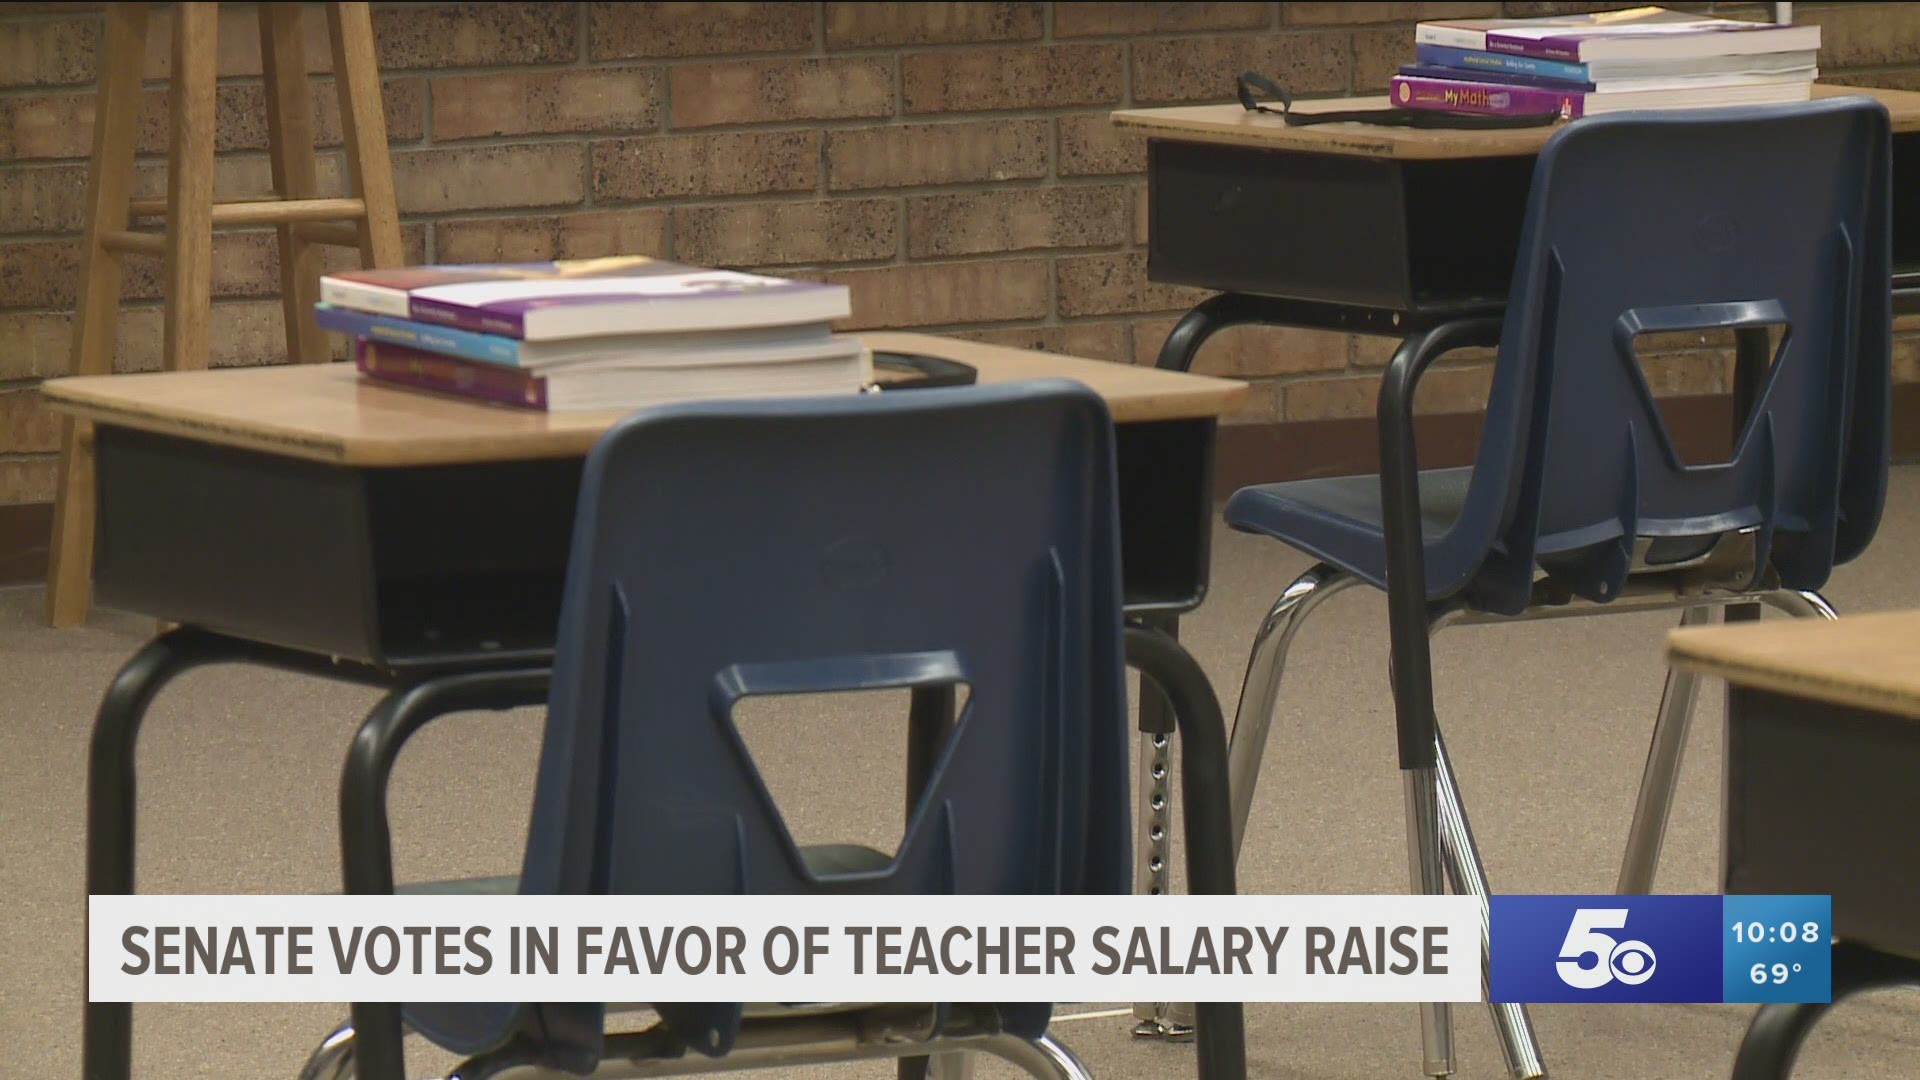 House Bill (HB) 1614 aims to help school districts that pay below the state's average and would create the teacher salary equalization fund.